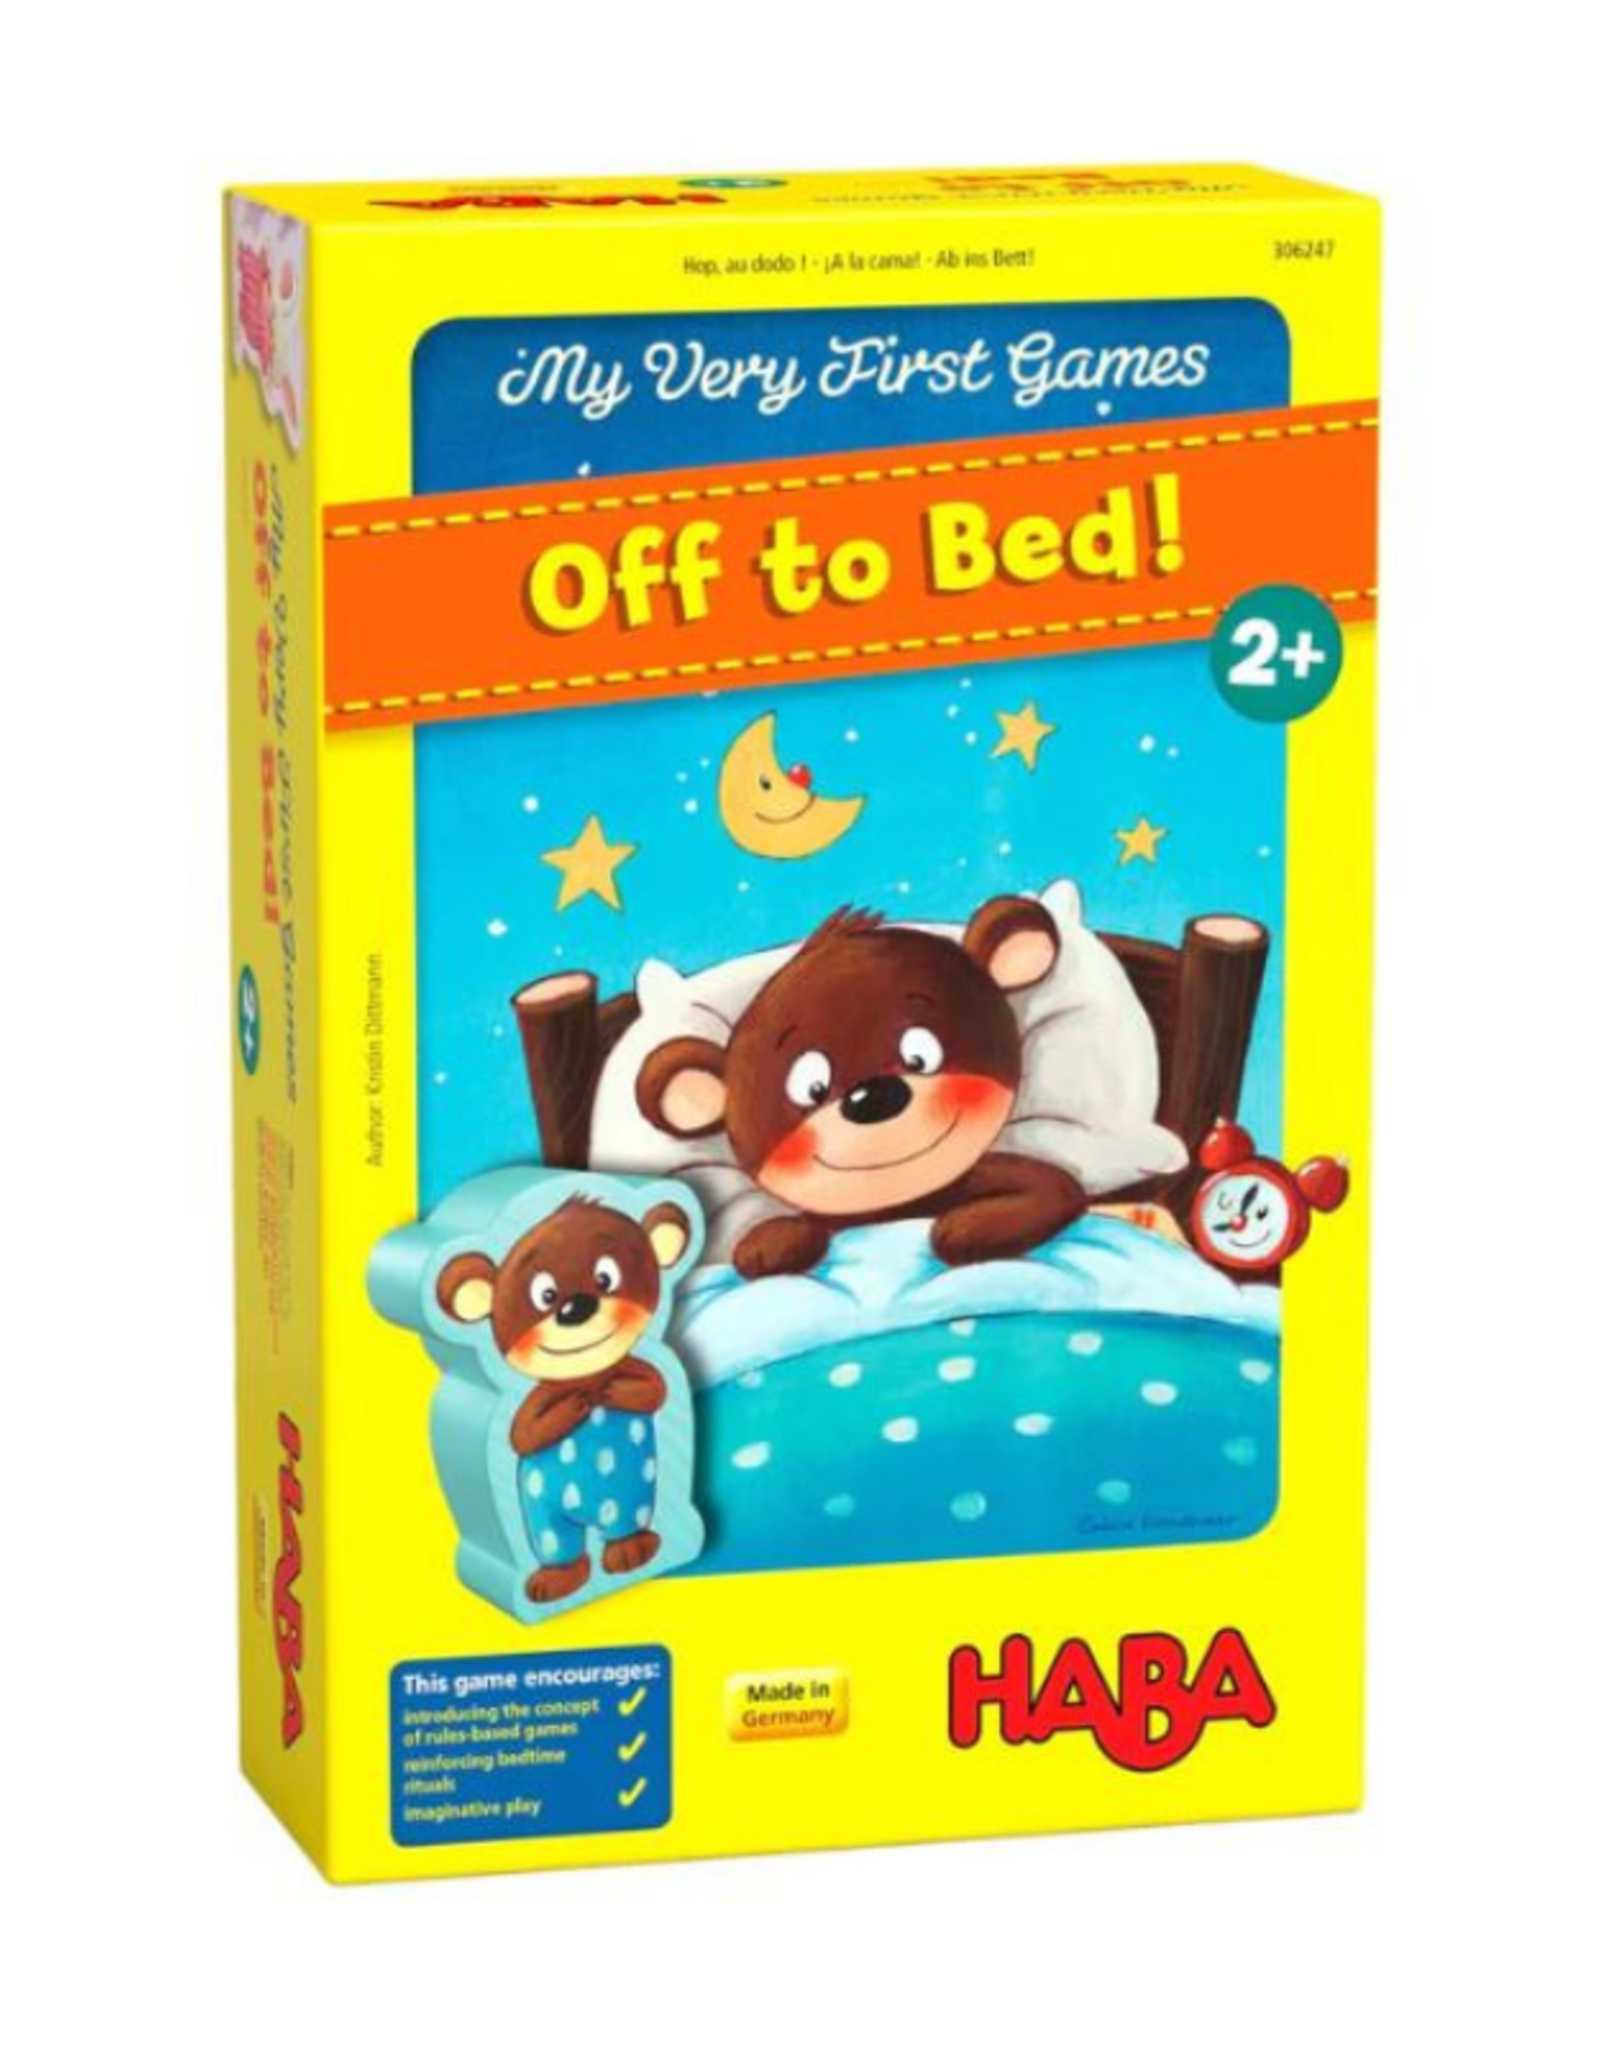 My Very First Games: Off to Bed!